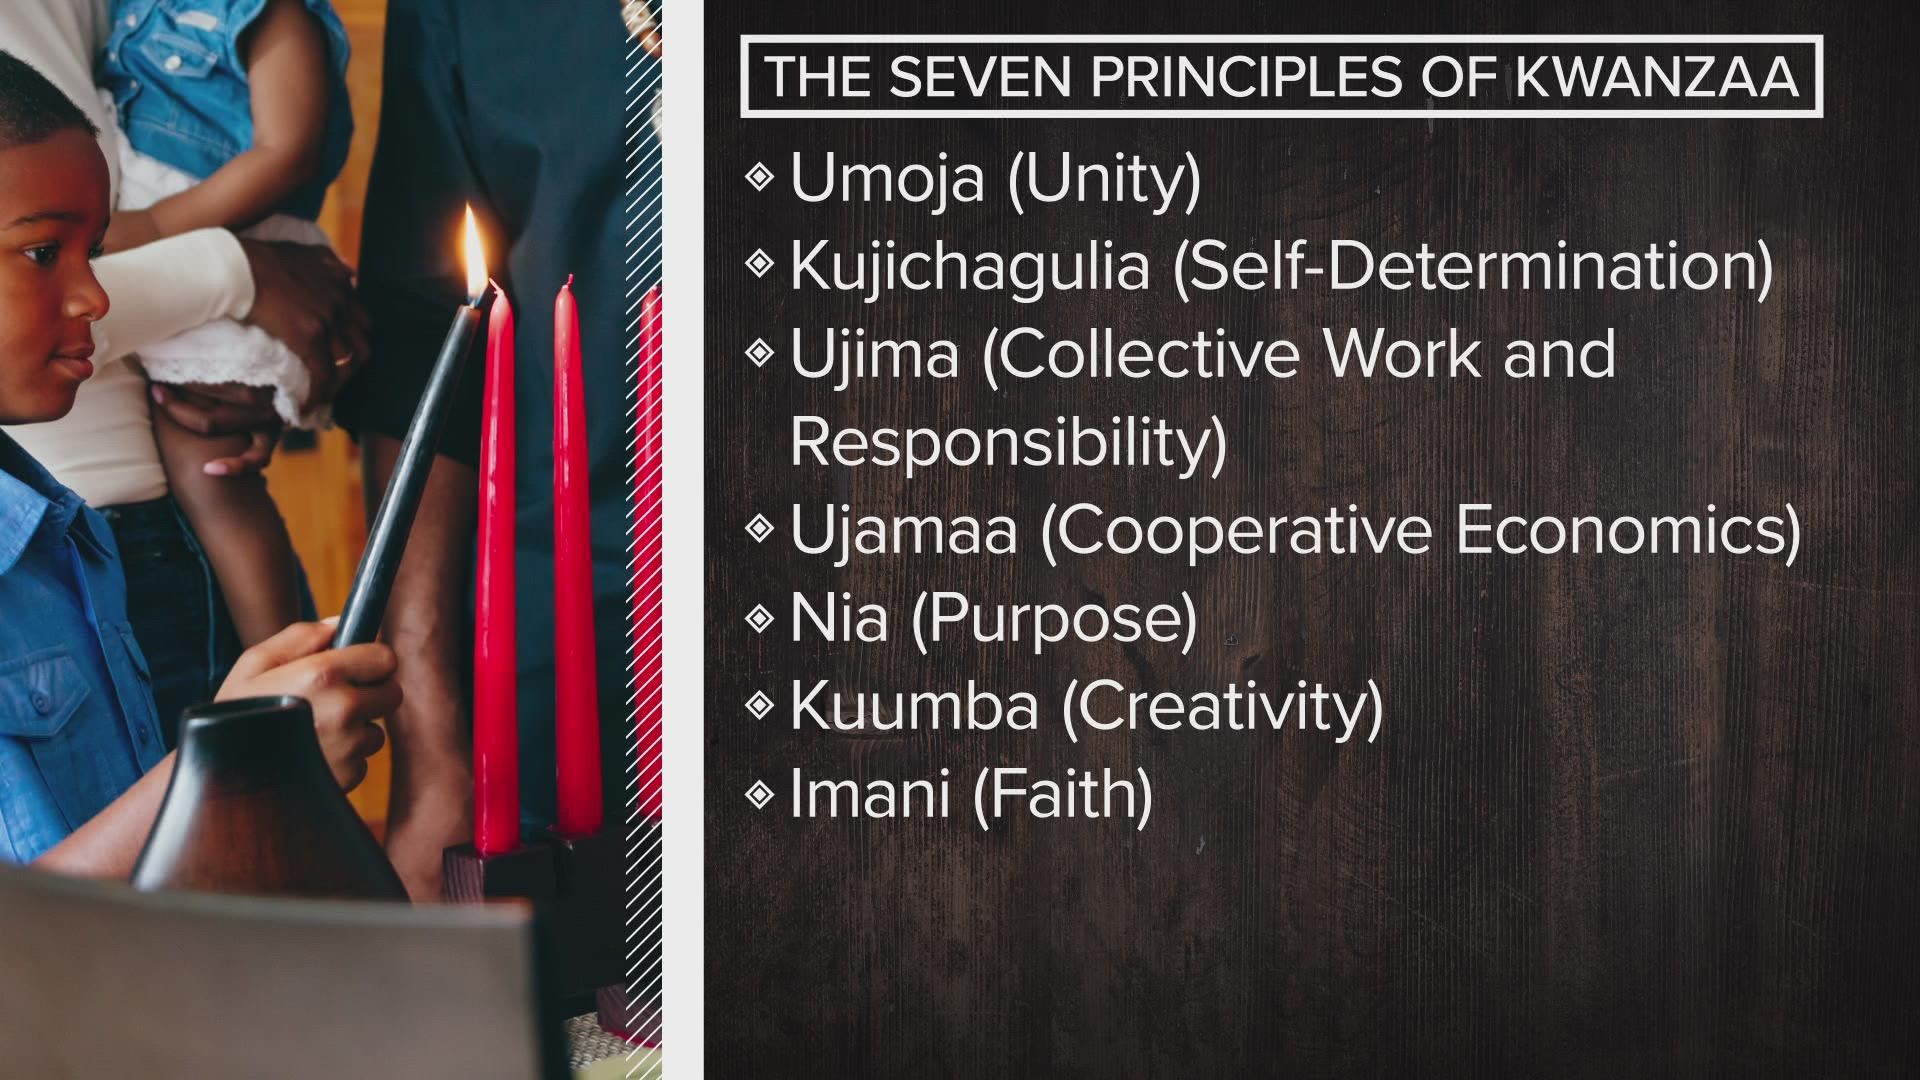 Knoxville will have a week of events centered around Kwanzaa principles like unity, self-determination as well as collective work and responsibility.